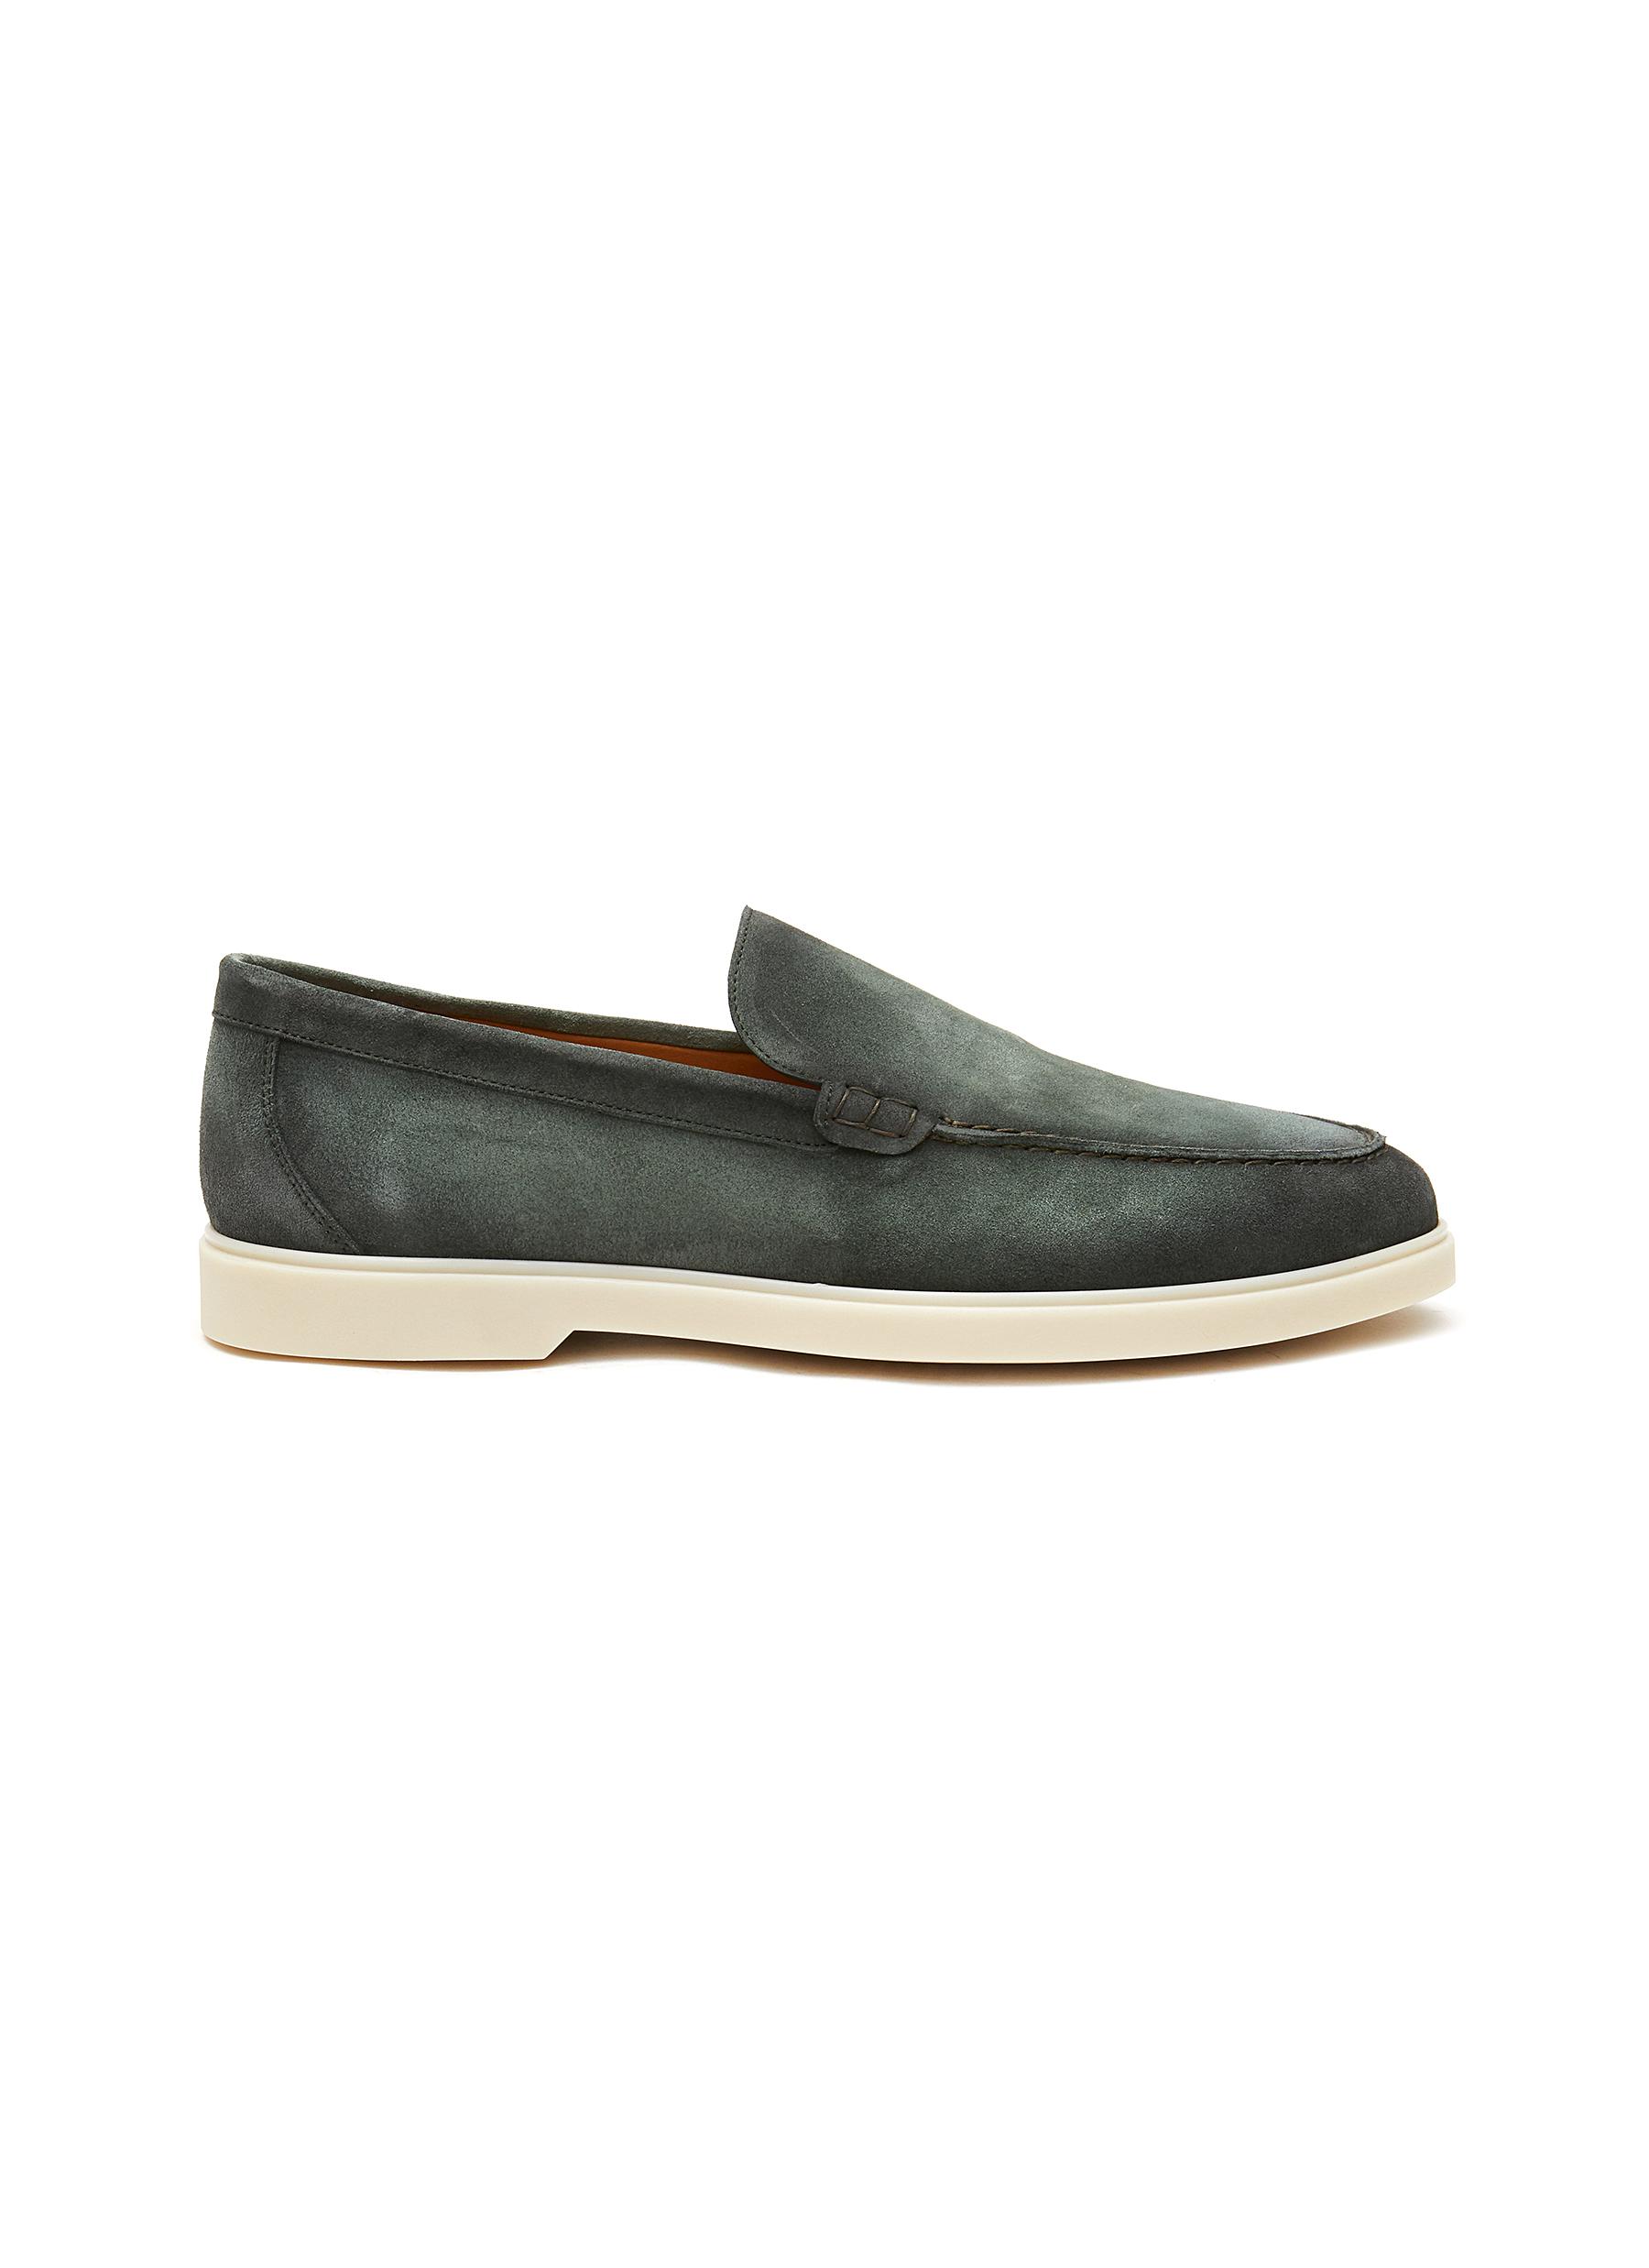 MAGNANNI ‘Paraiso' Suede Apron Toe Slip-On Sneakers